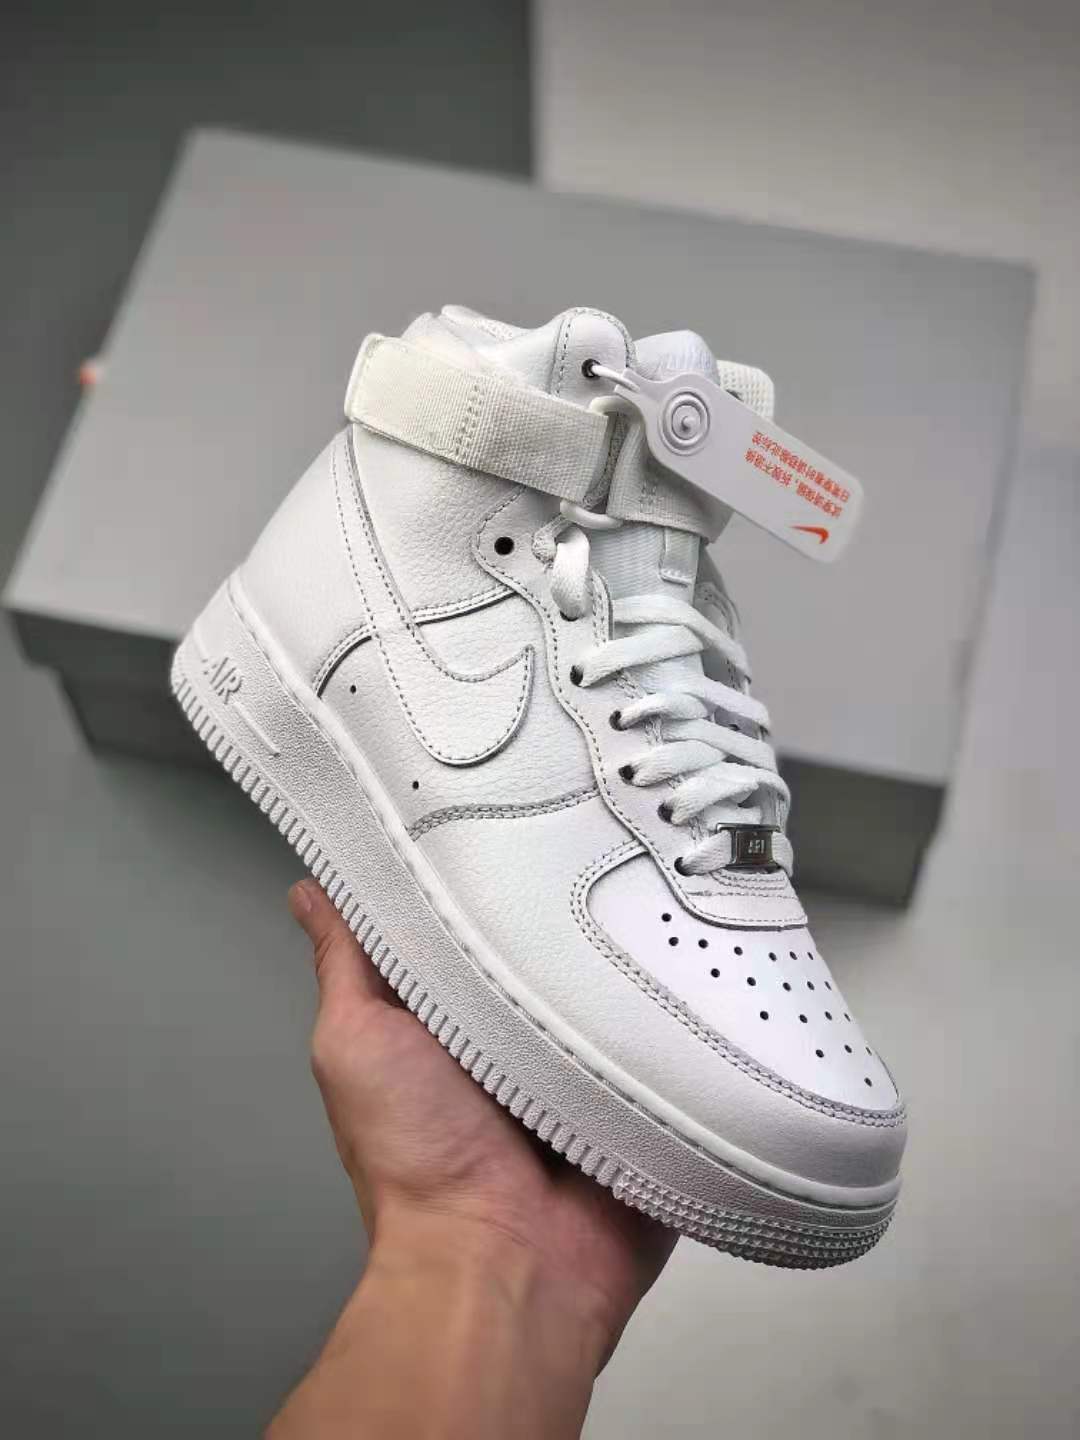 Nike Air Force 1 High Triple White 334031-105 - Classic Style and Crisp All-White Appeal